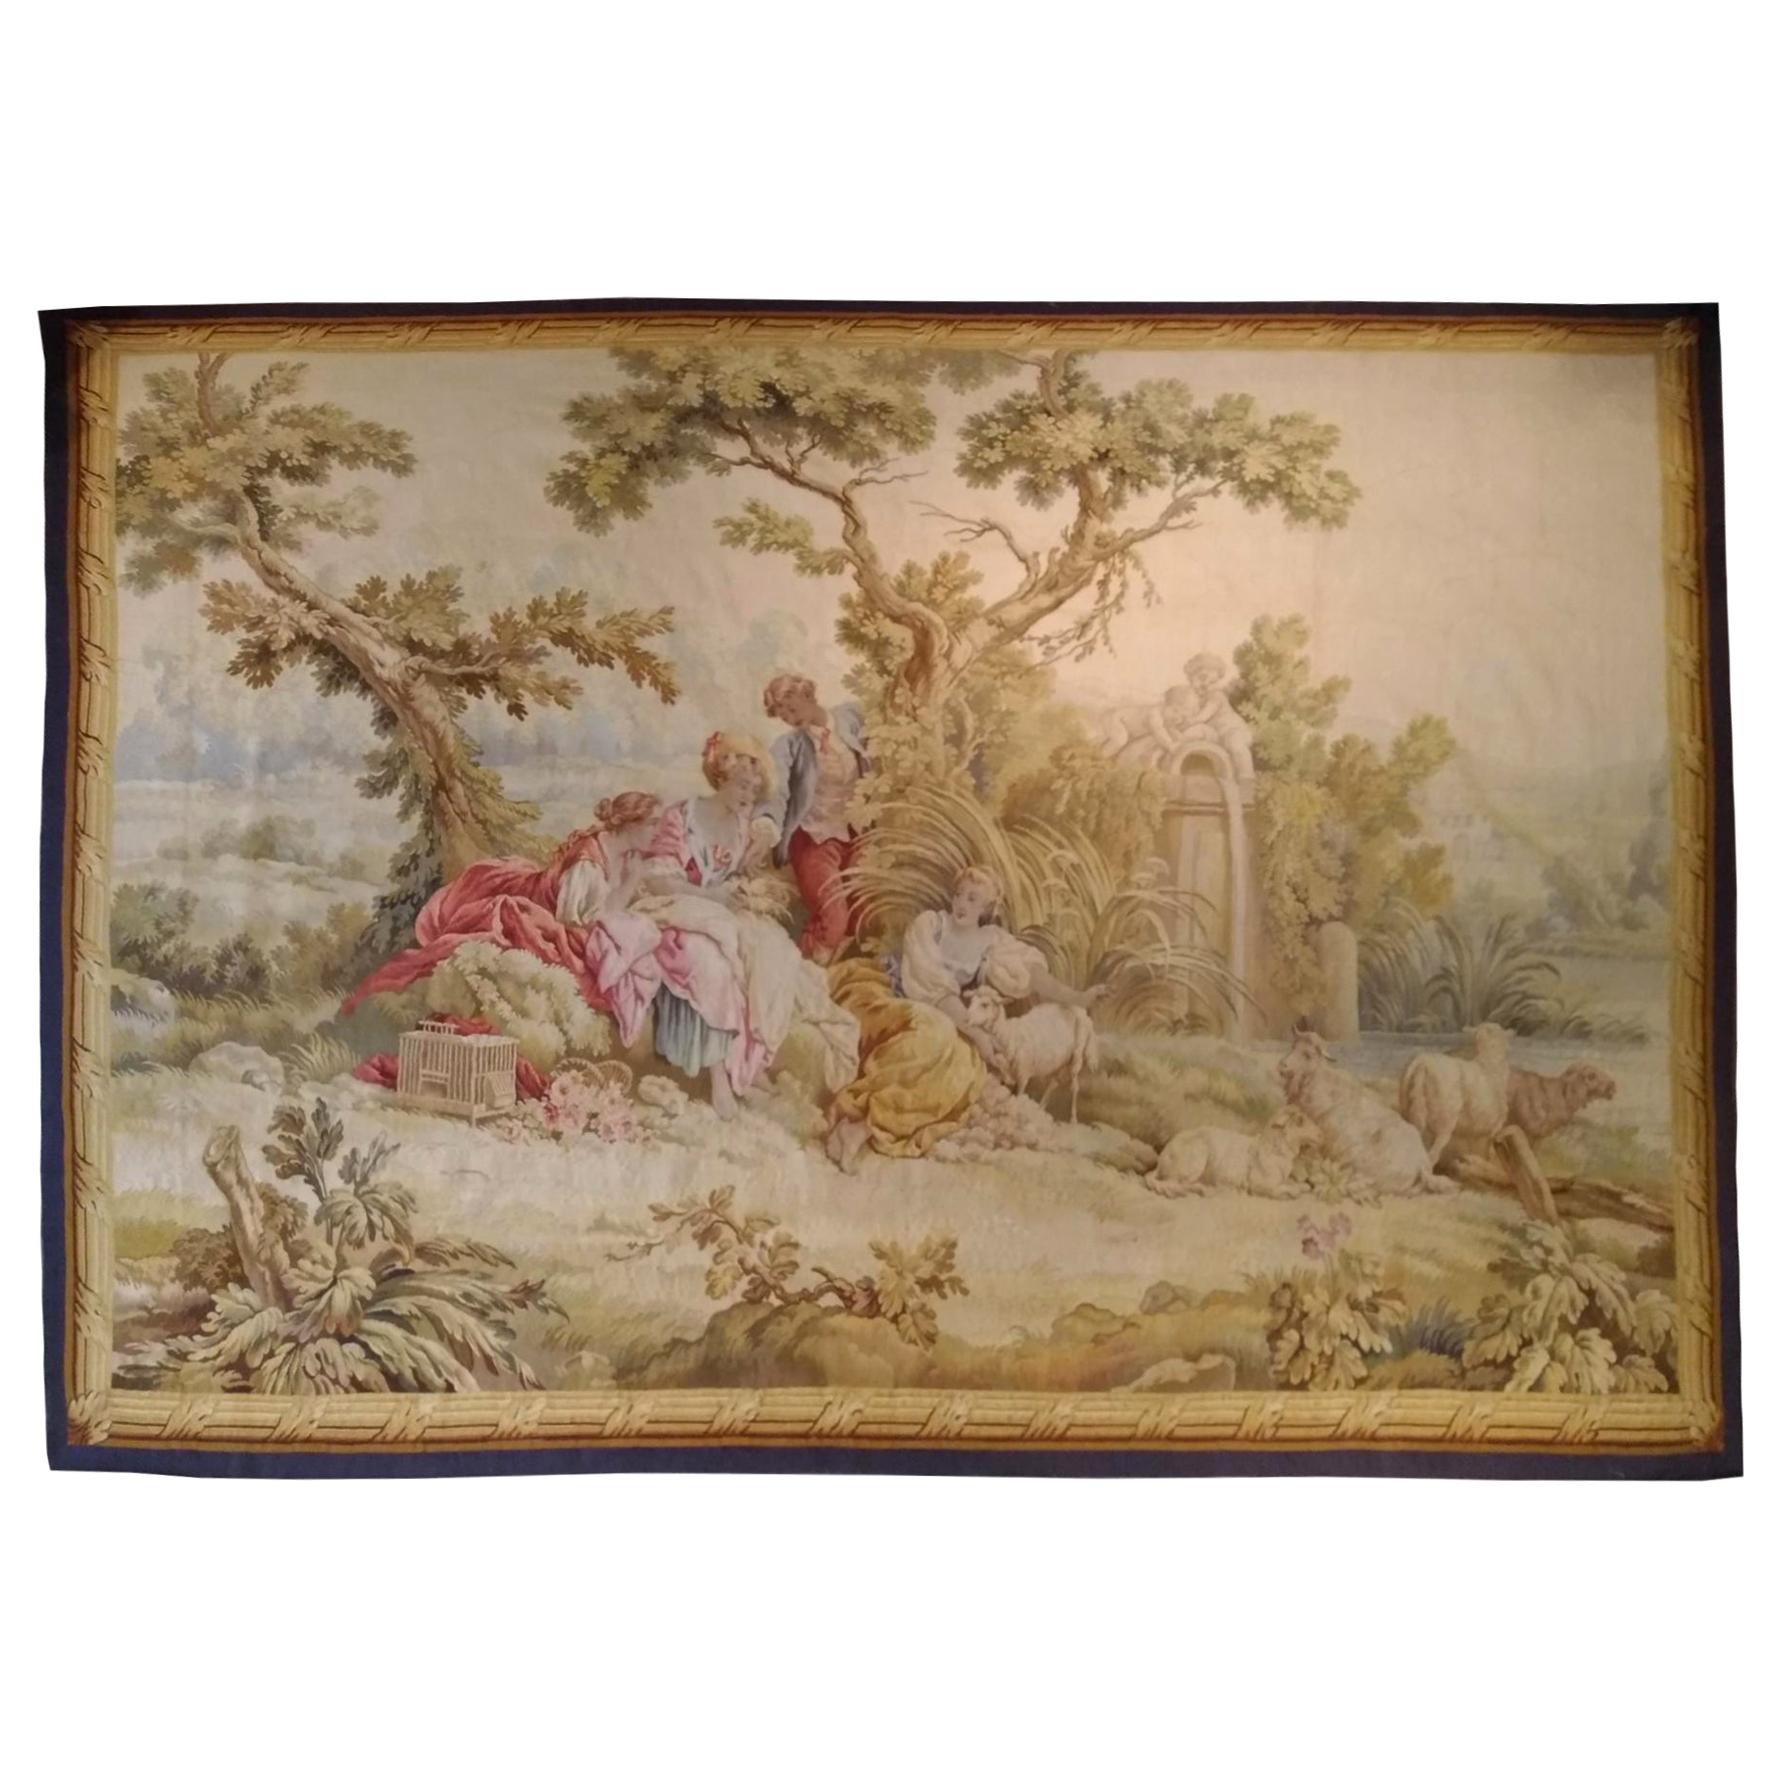 Wall Decor Vintage French Tapestry Wall Hanging 89 x 75 cm Antique French Tapestry Pictorial French Tapestry Wall Hanging